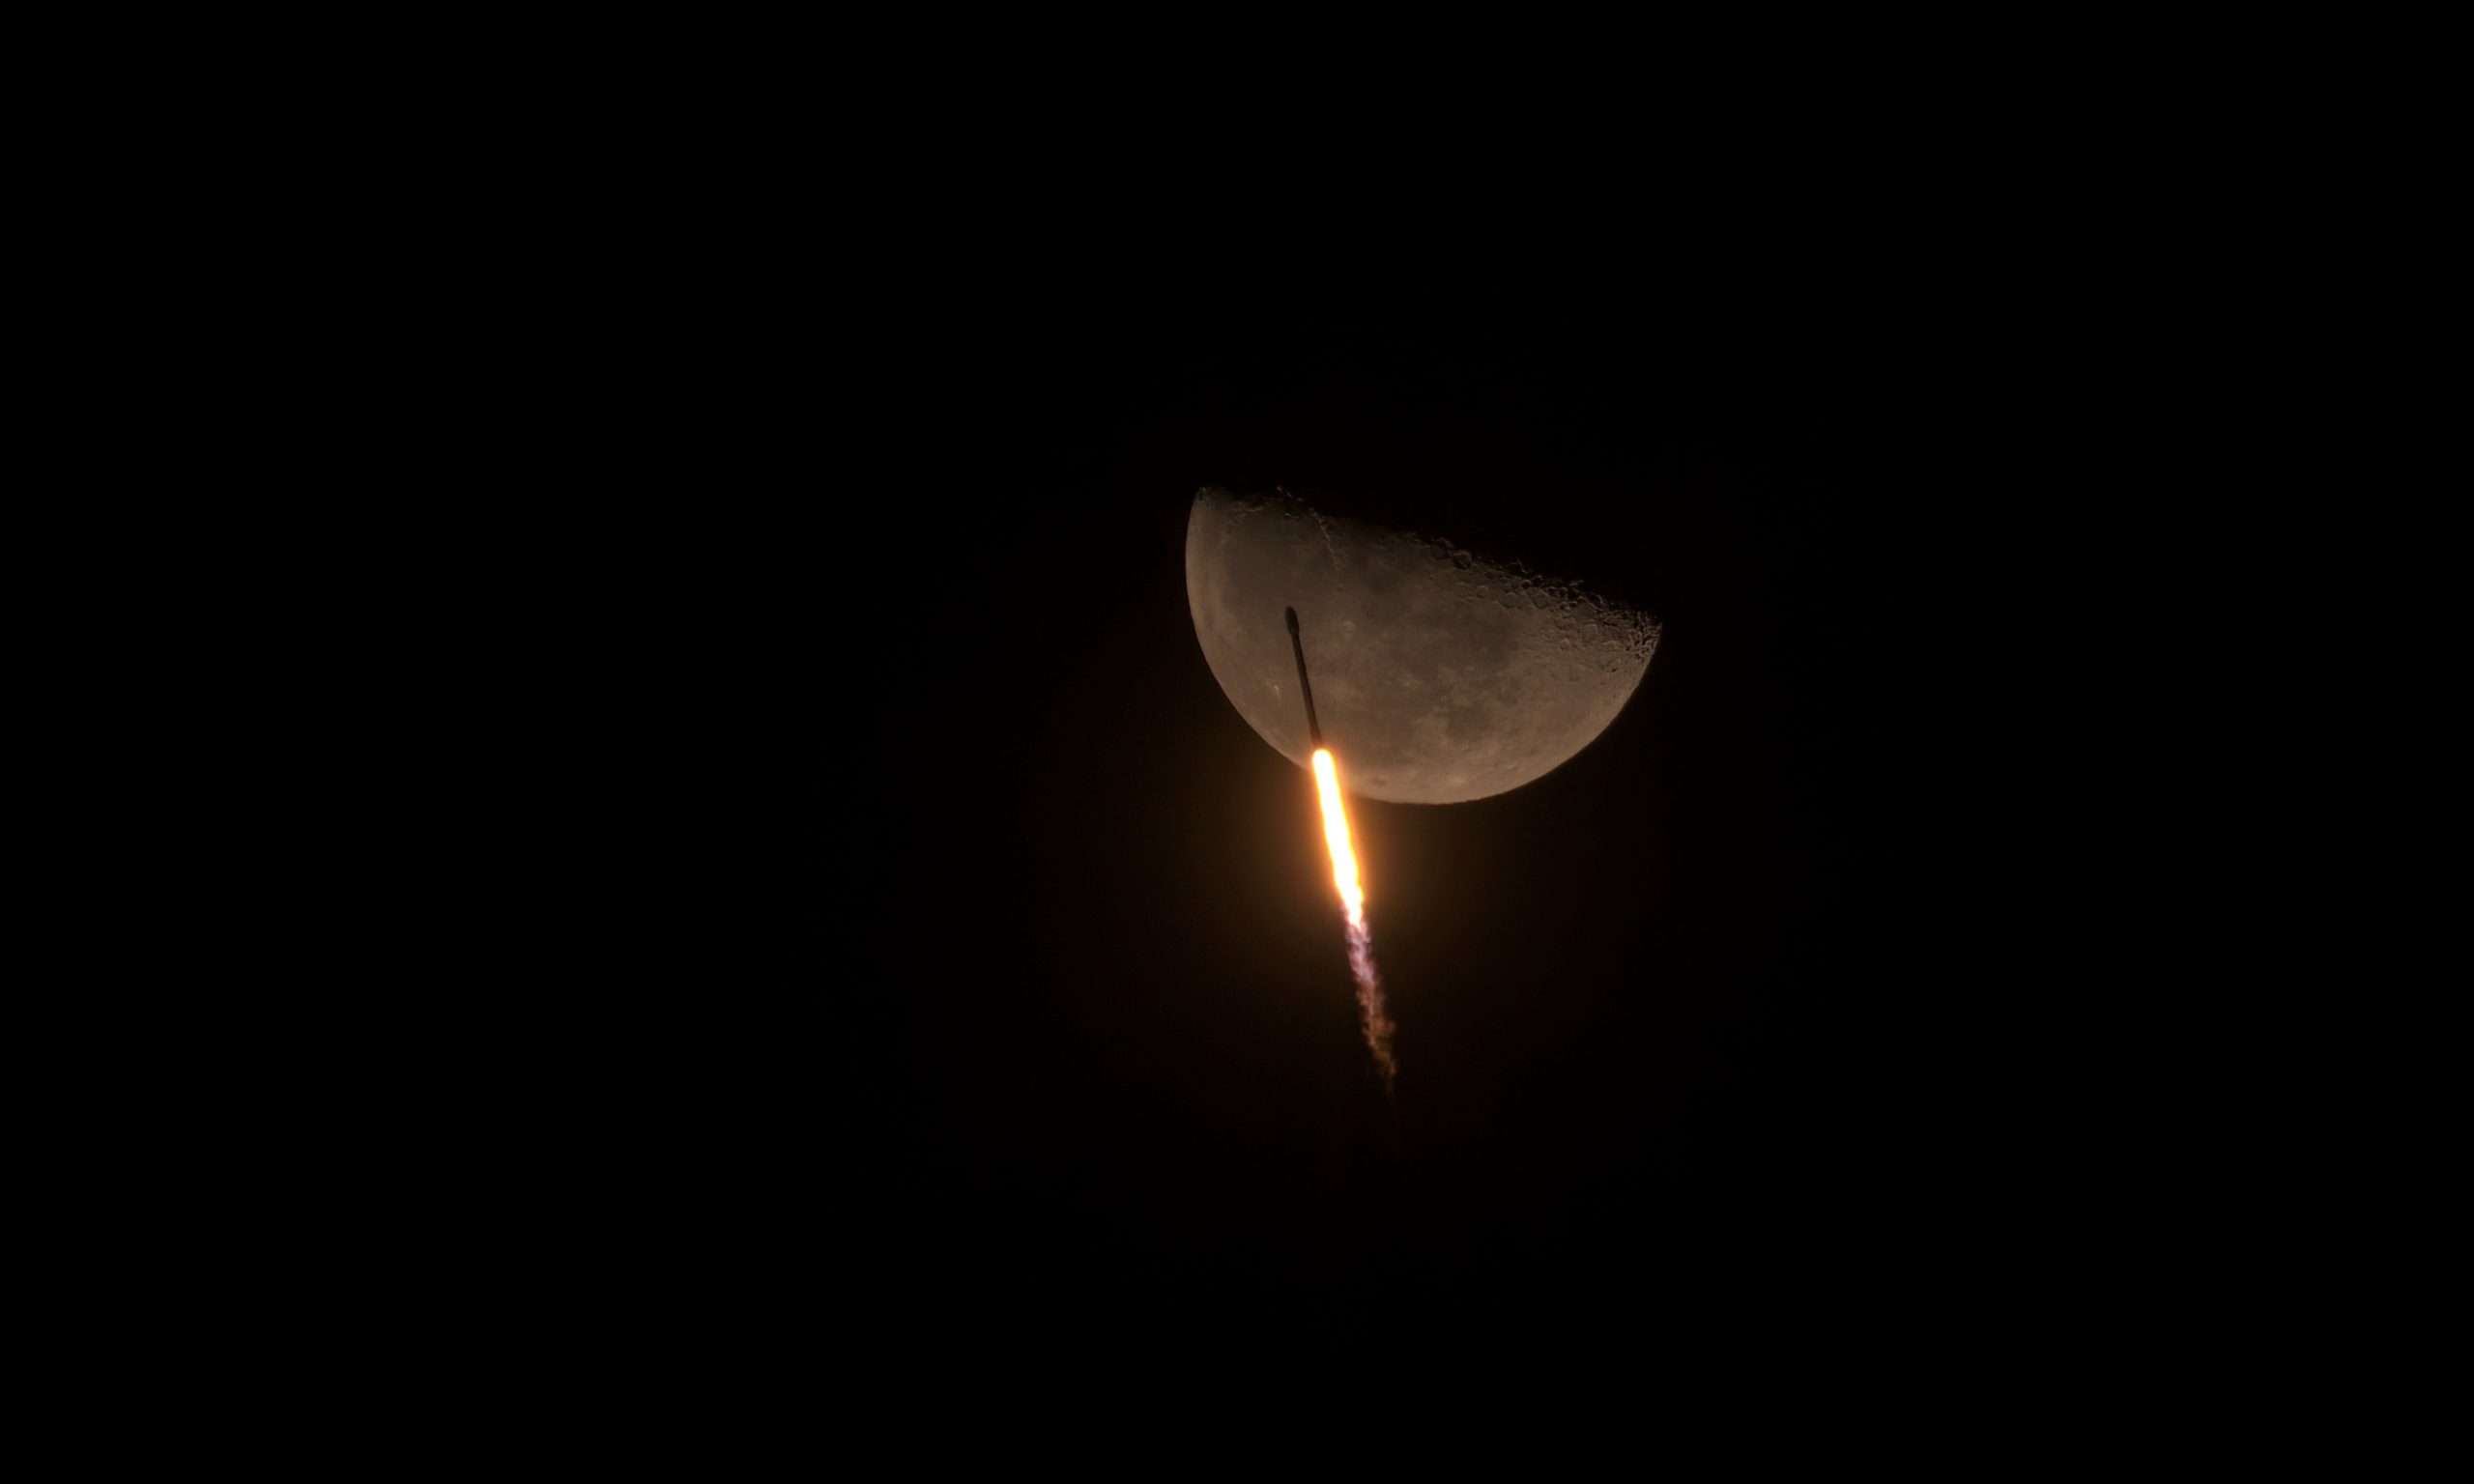 The Falcon 9 rocket launching across the moon in February 2021. (Photo: Paul Eckhardt)